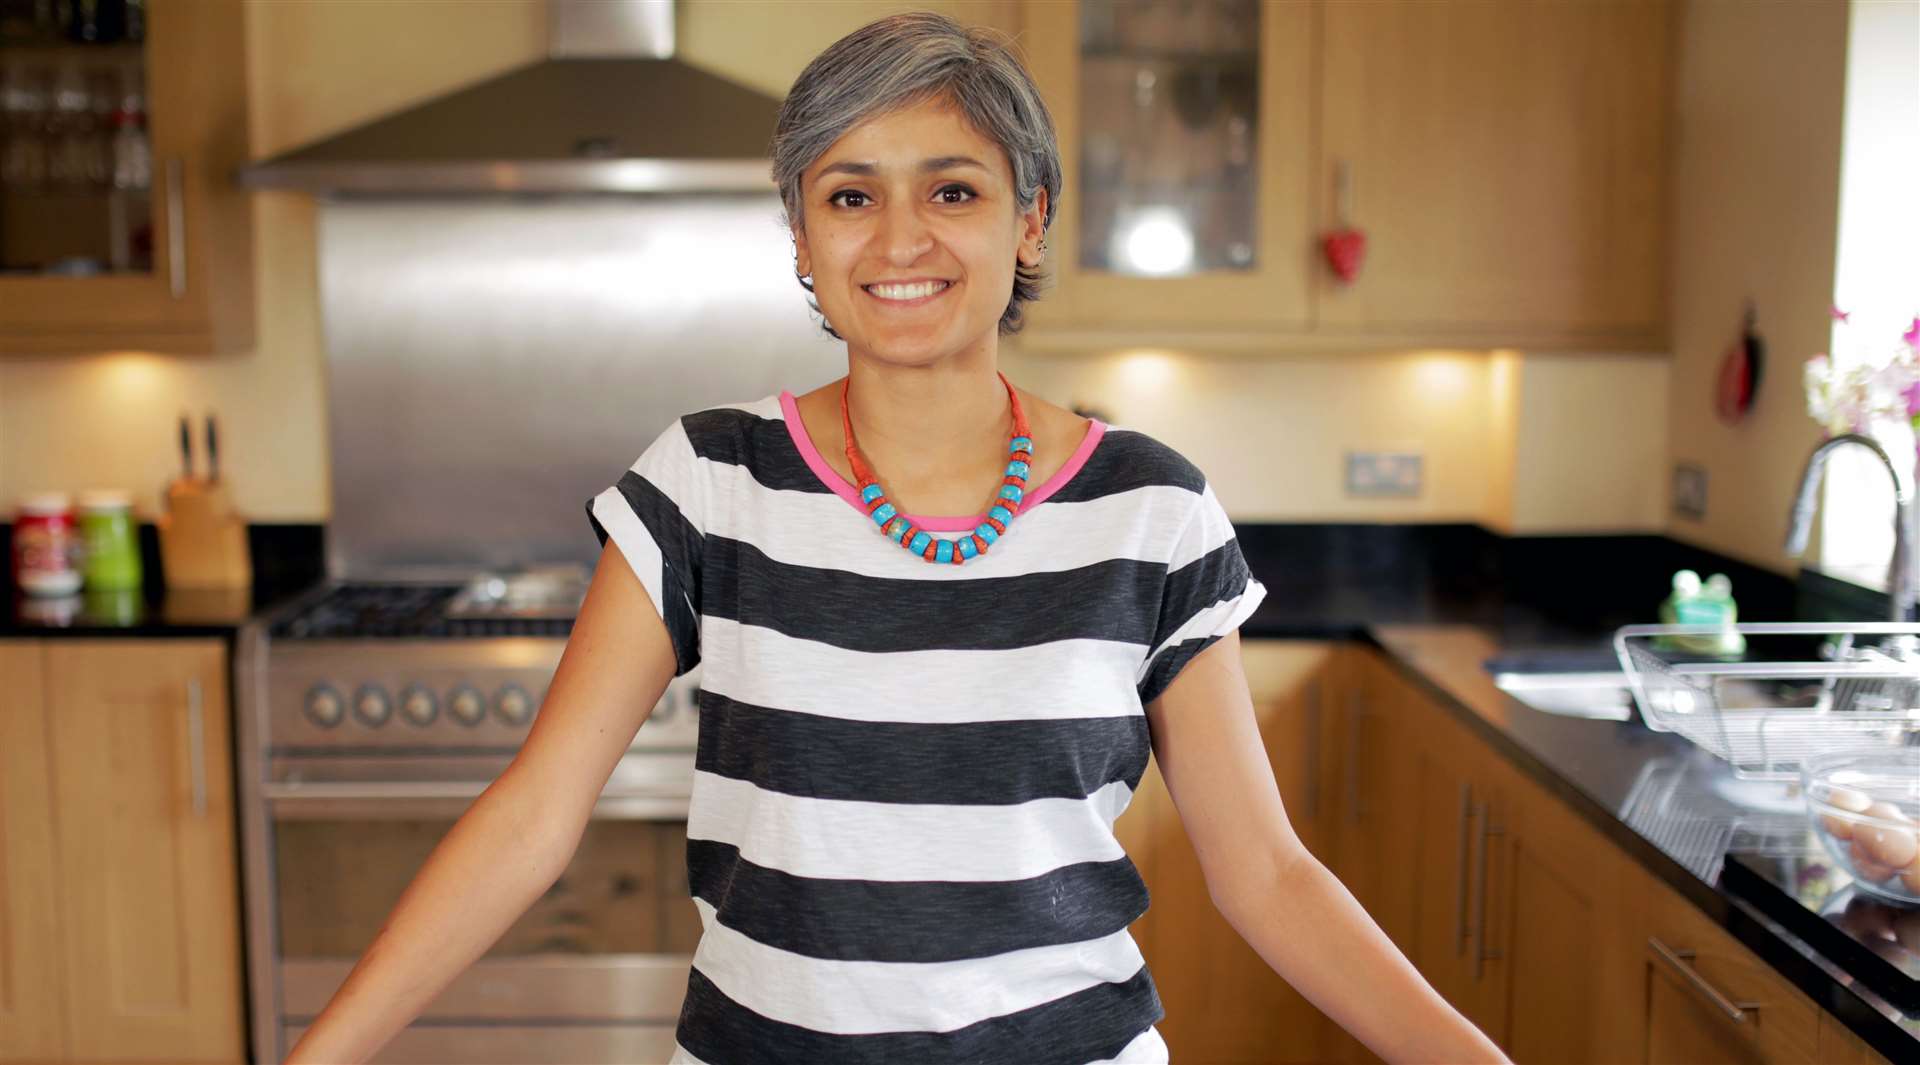 Chetna Makan has her own cookery Youtube channel where she hosts weekly episodes